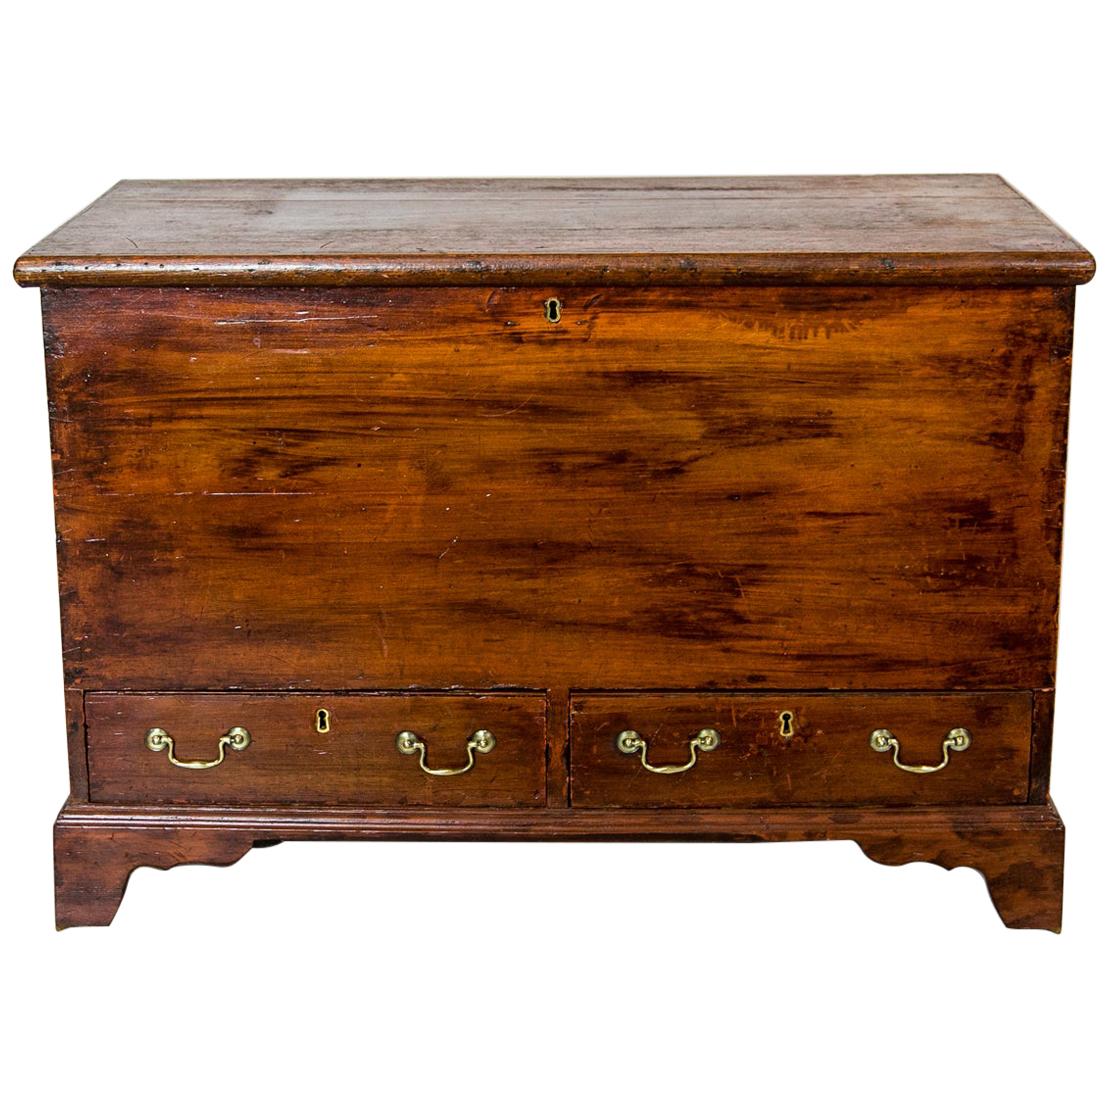 English Painted Pine Blanket Chest For Sale